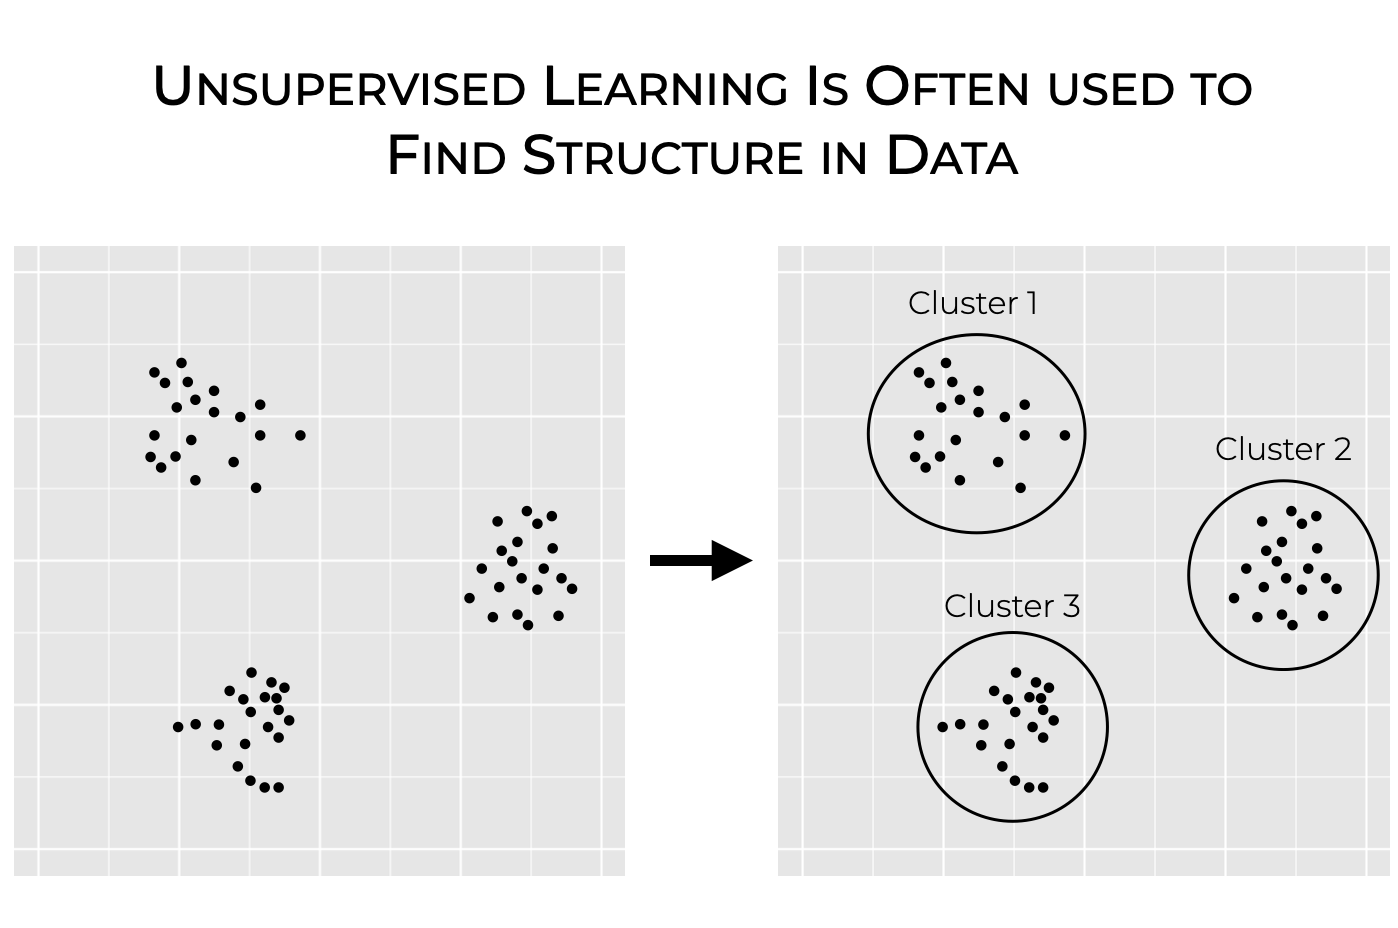 A simple visual example of unsupervised learning, where a "clustering" algorithm finds 3 different clusters in the input data.